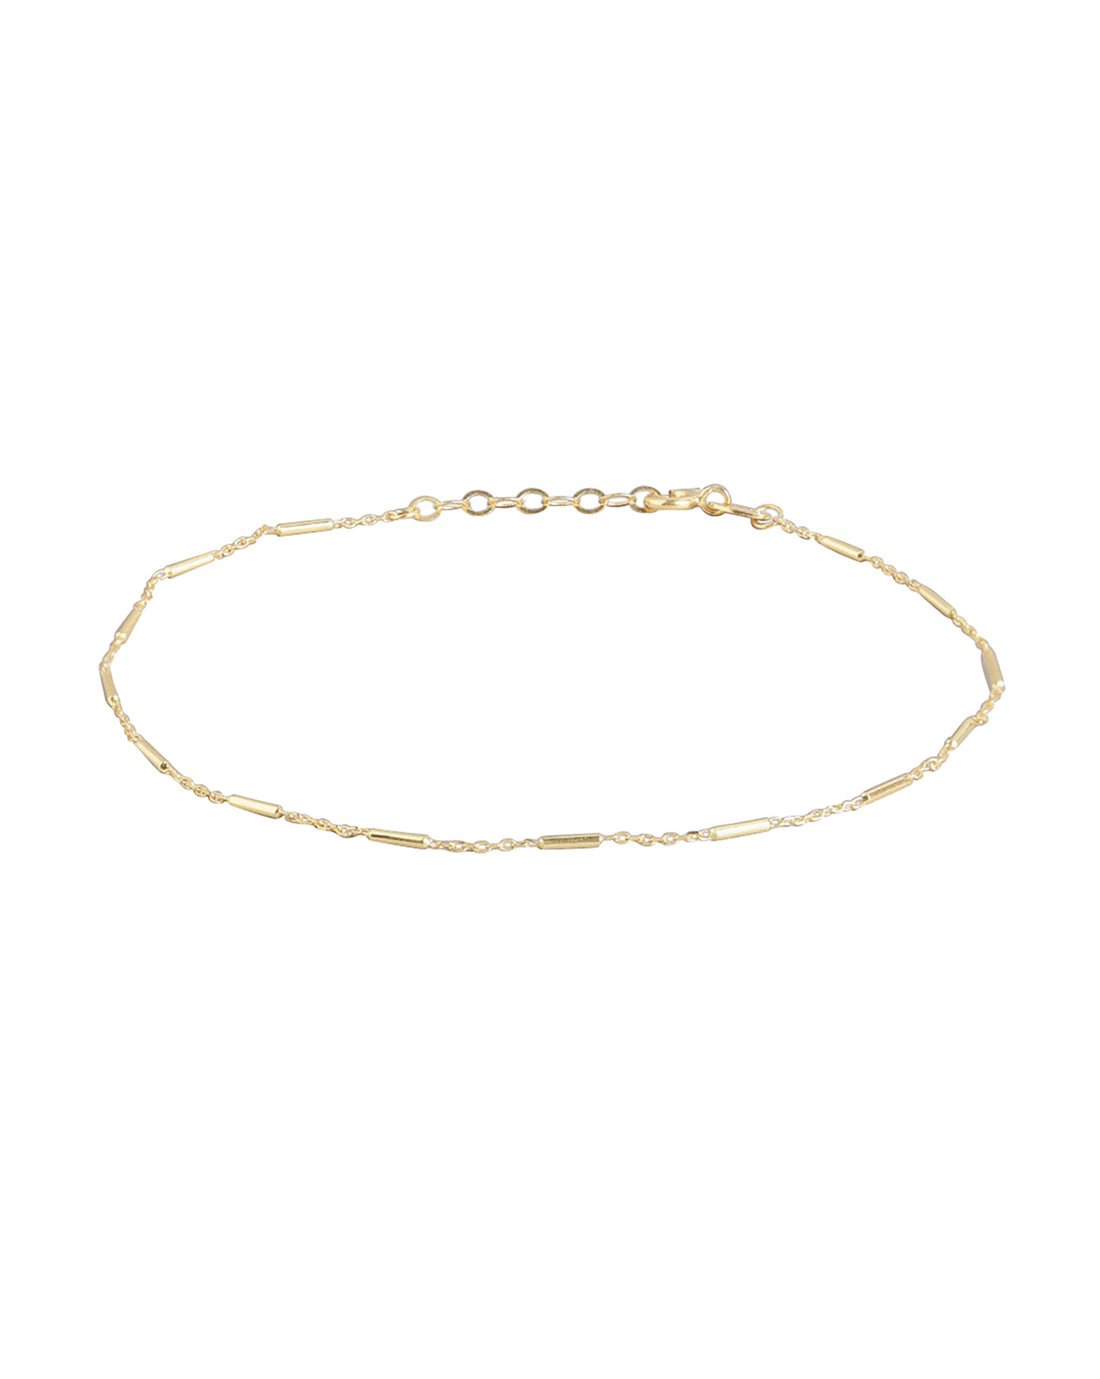 Carlton London Gold-Plated Anklet For Women